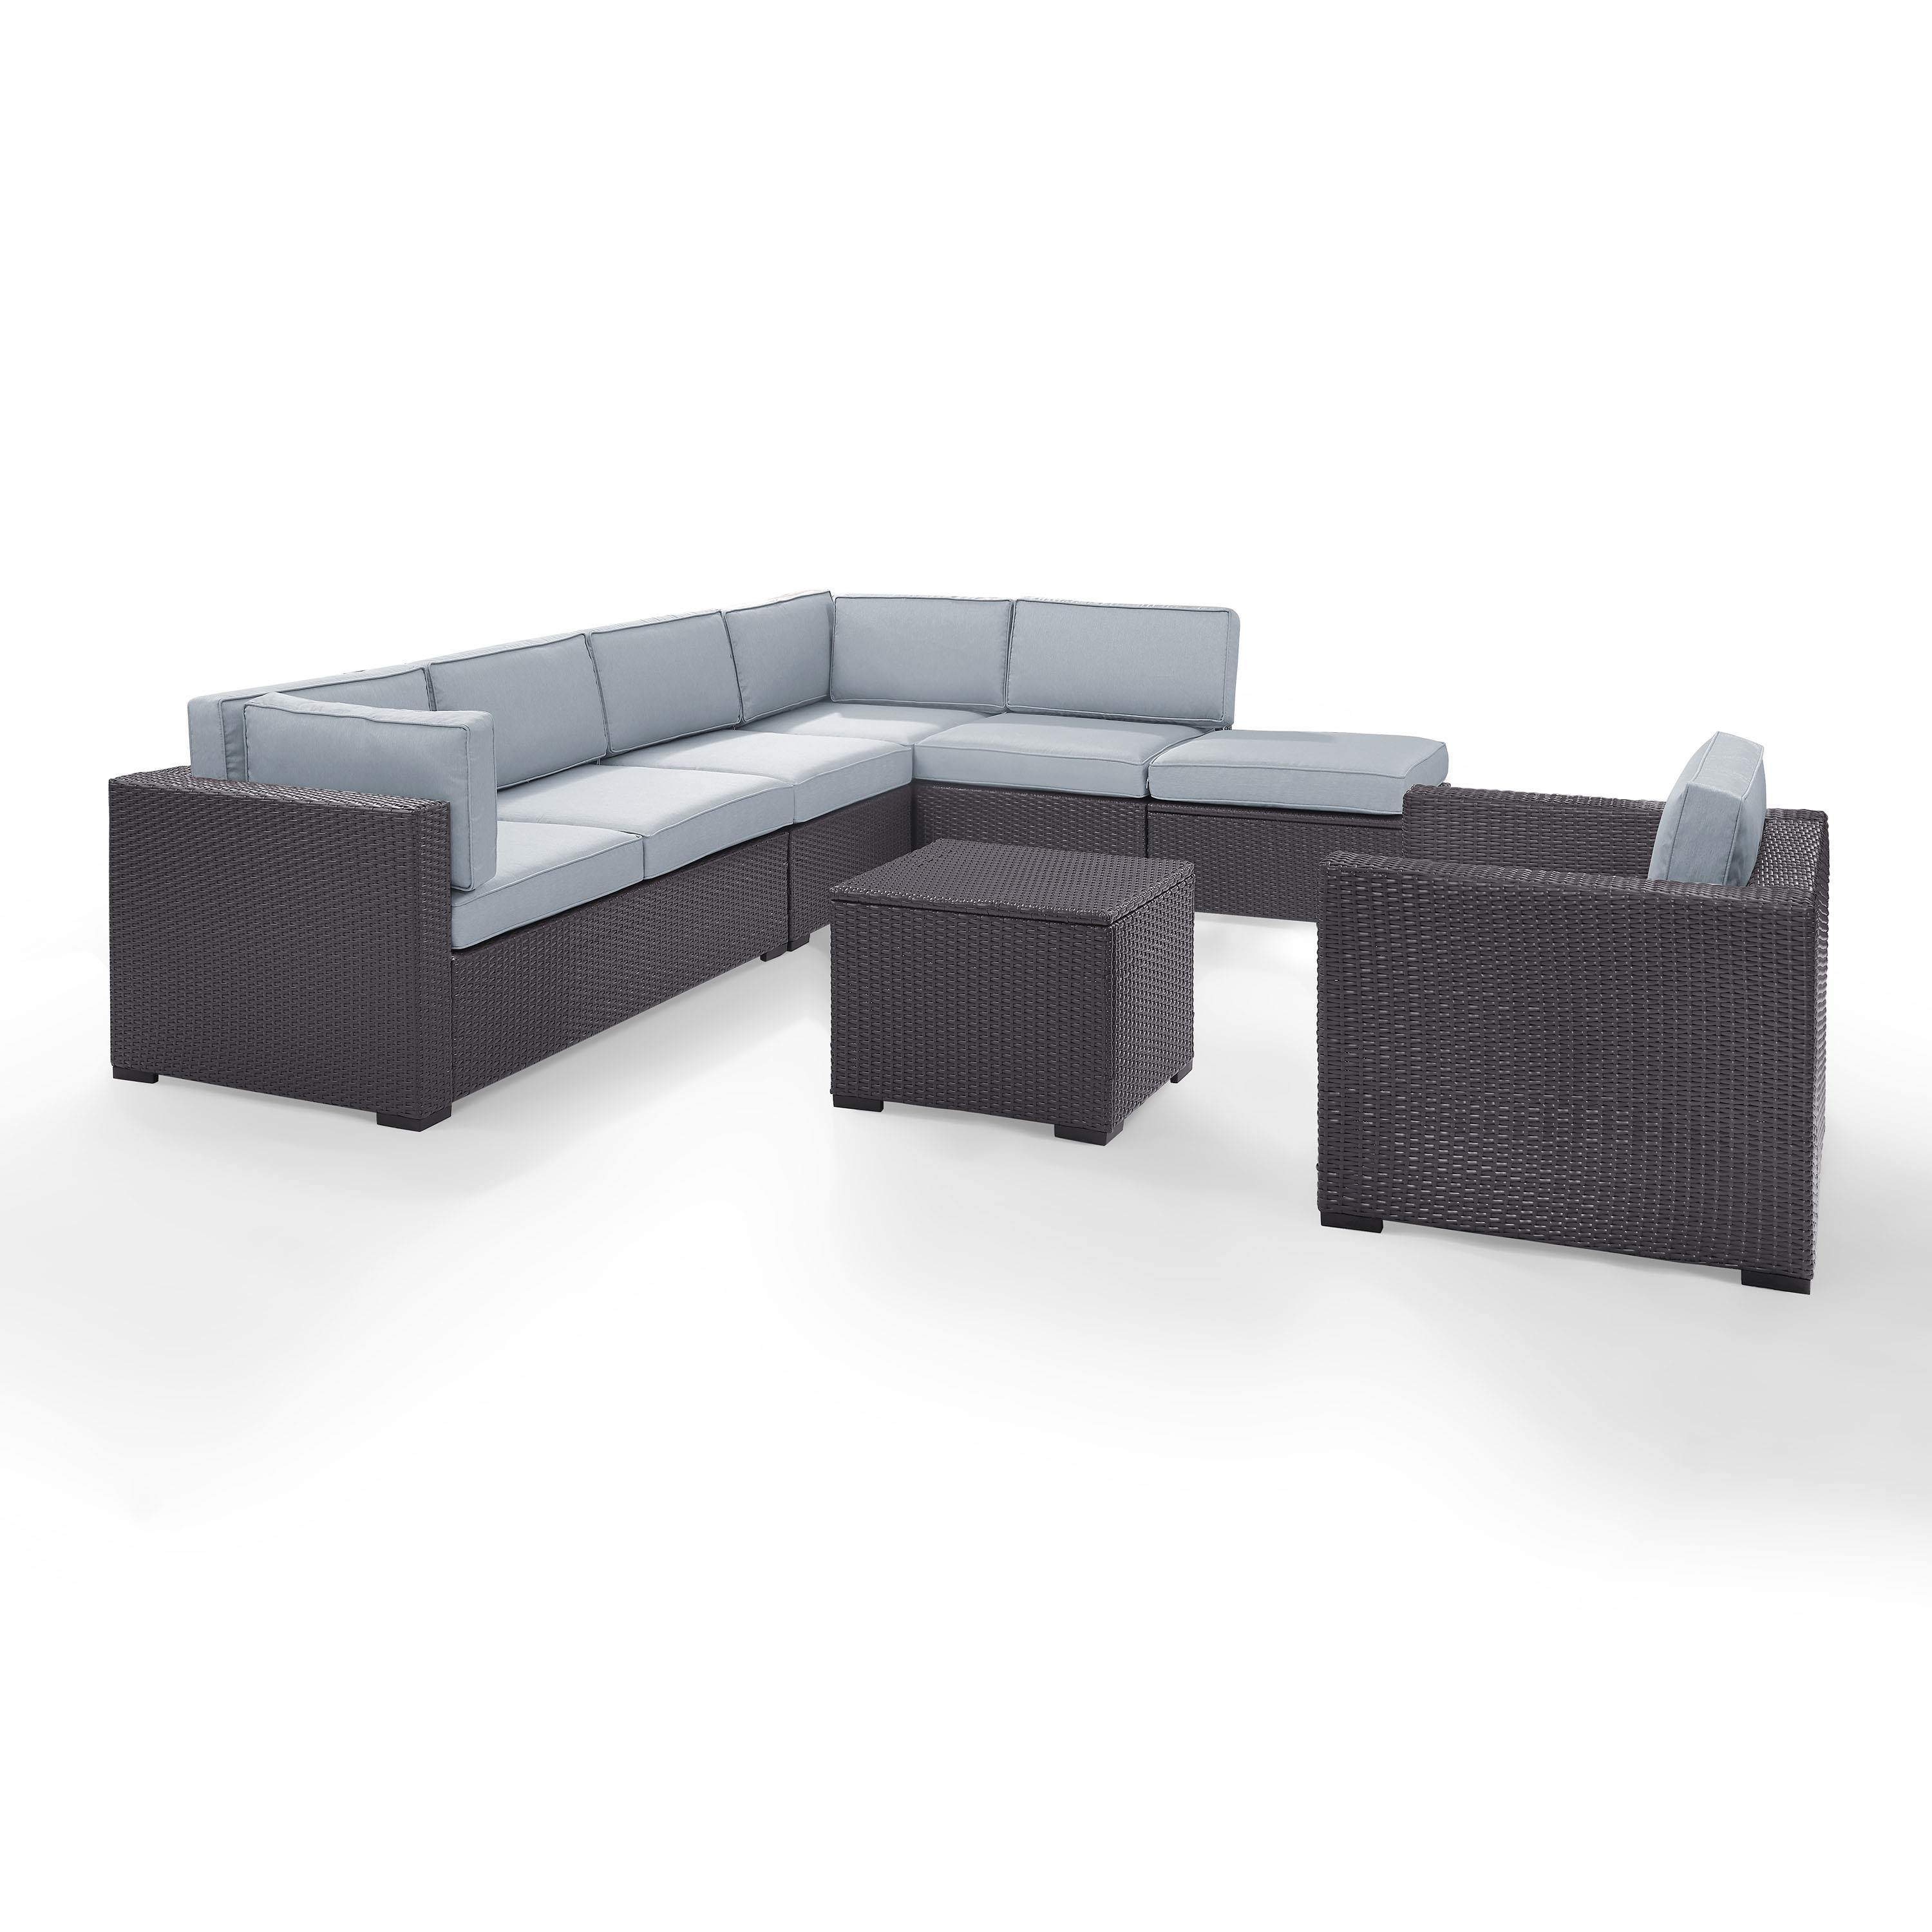 Crosley Furniture Biscayne 6 Piece Metal Patio Sectional Set in Brown/Blue - image 3 of 4